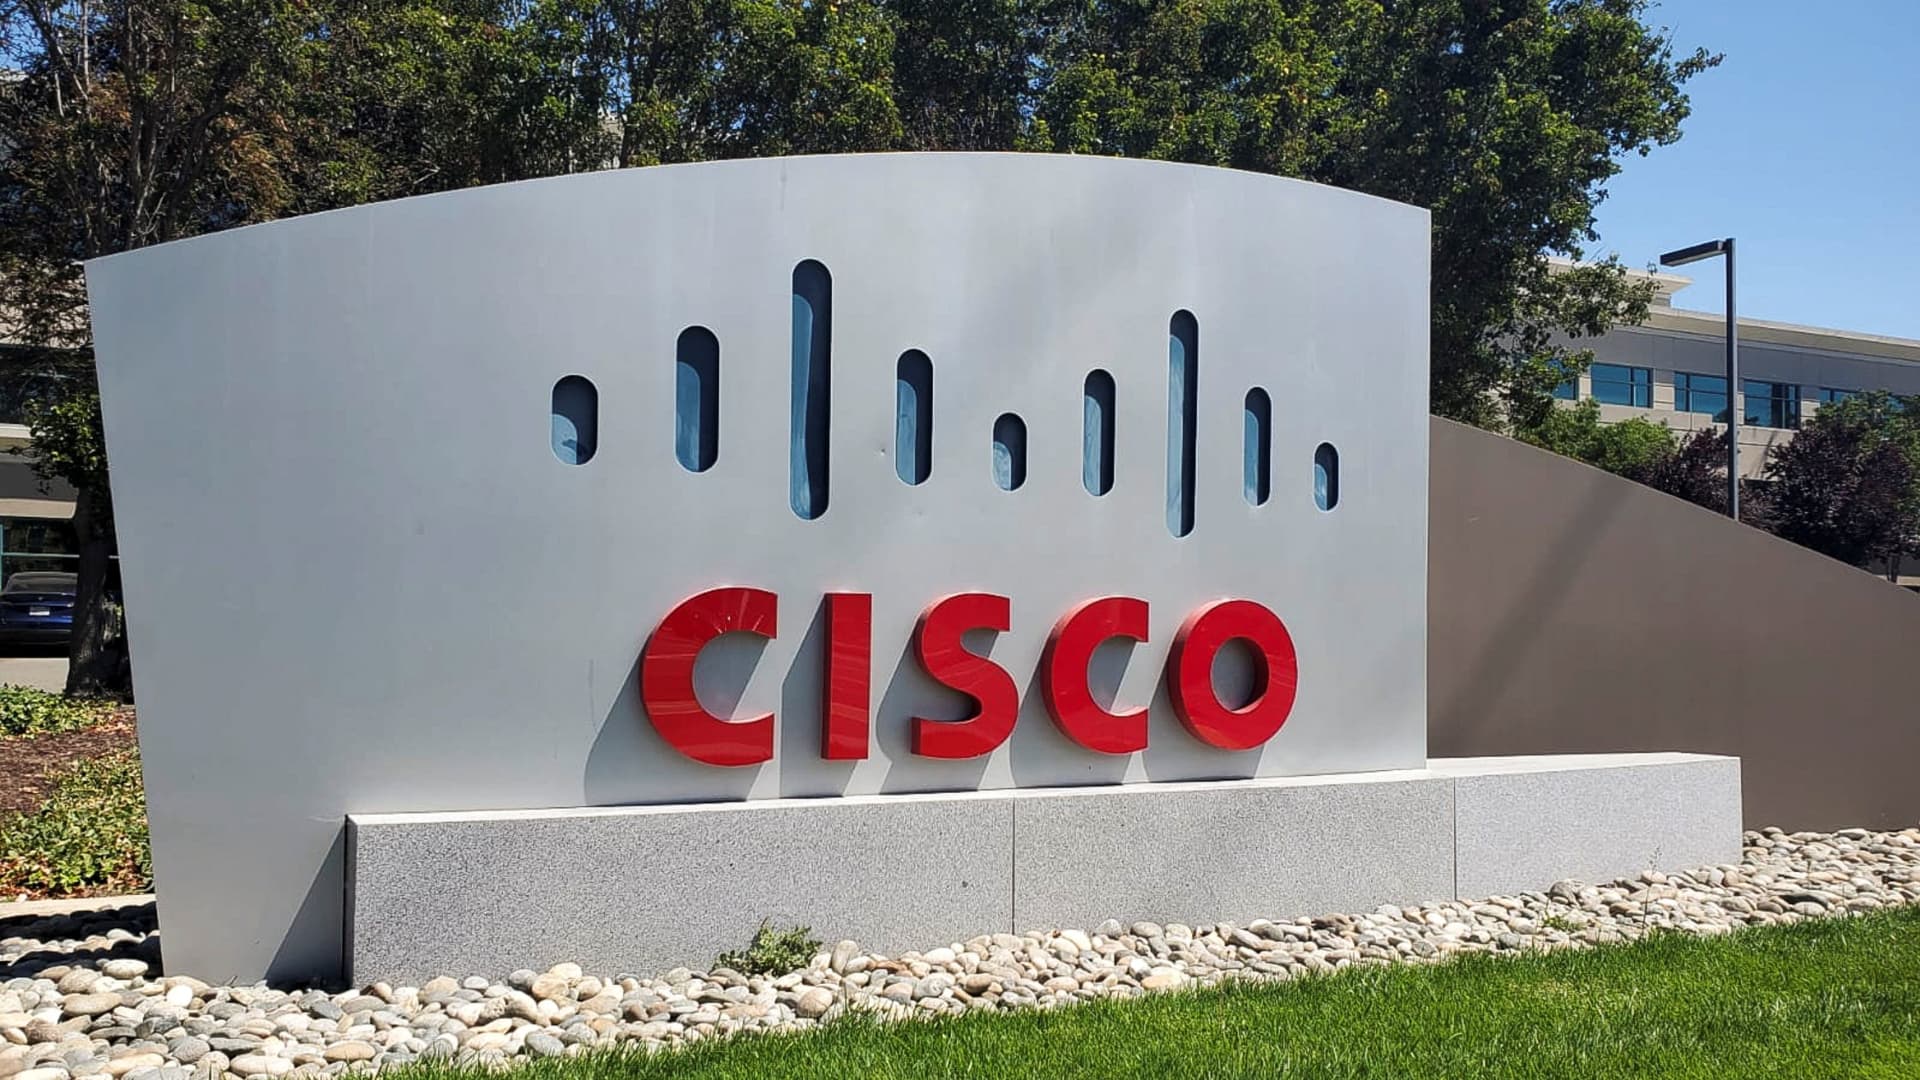 Stocks making the biggest moves midday: Cisco Systems, Twilio, Super Micro Computer and more